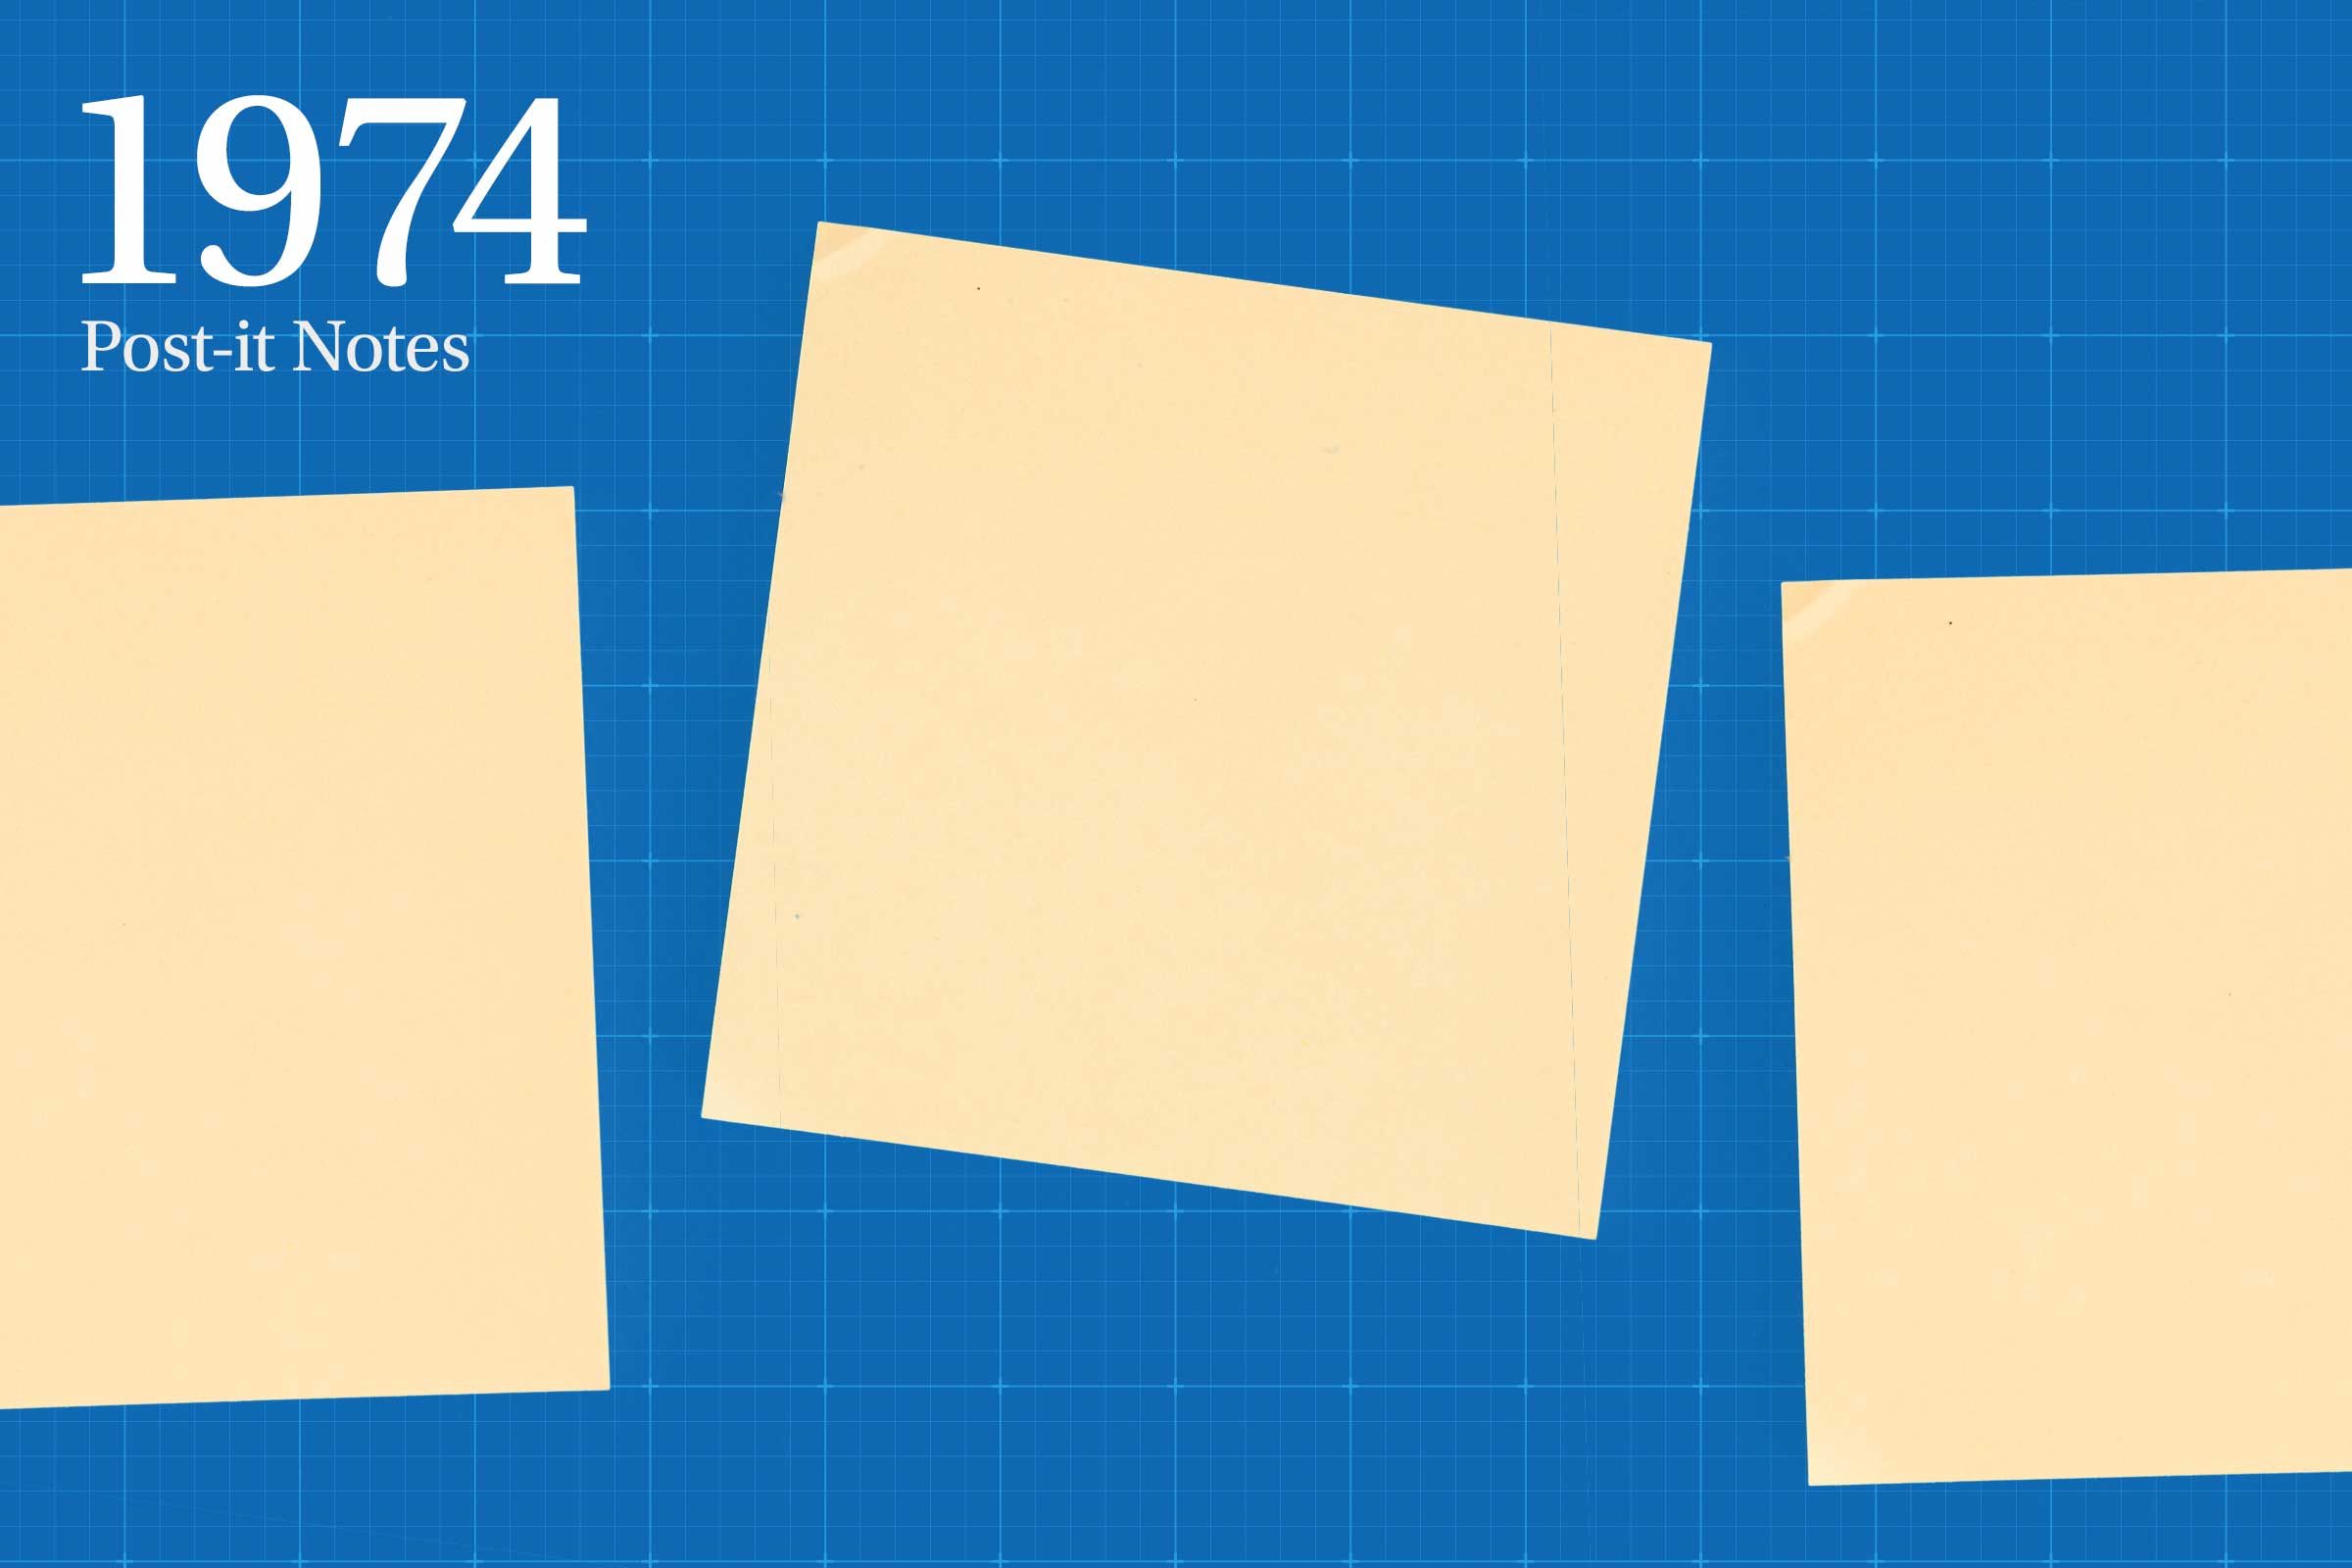 1974: Post-it Notes